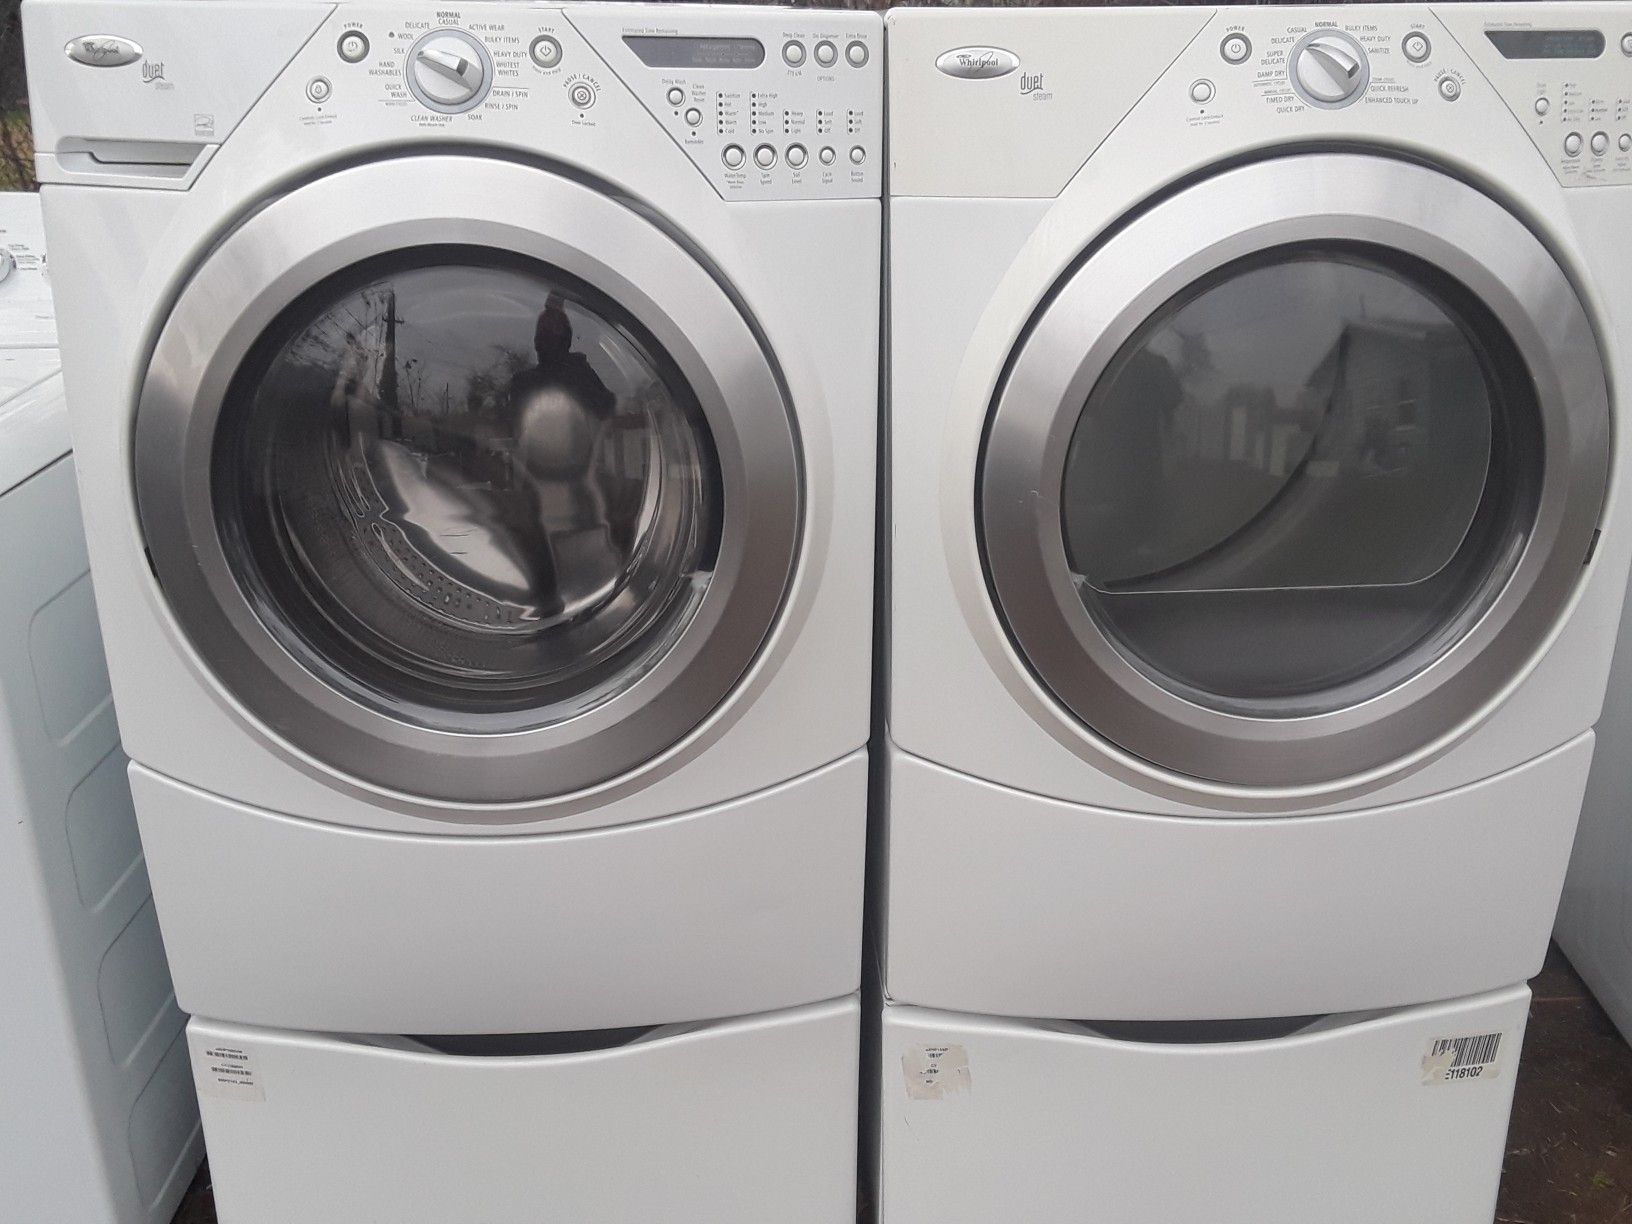 Whirlpool duet washer and gas dryer set with warranty